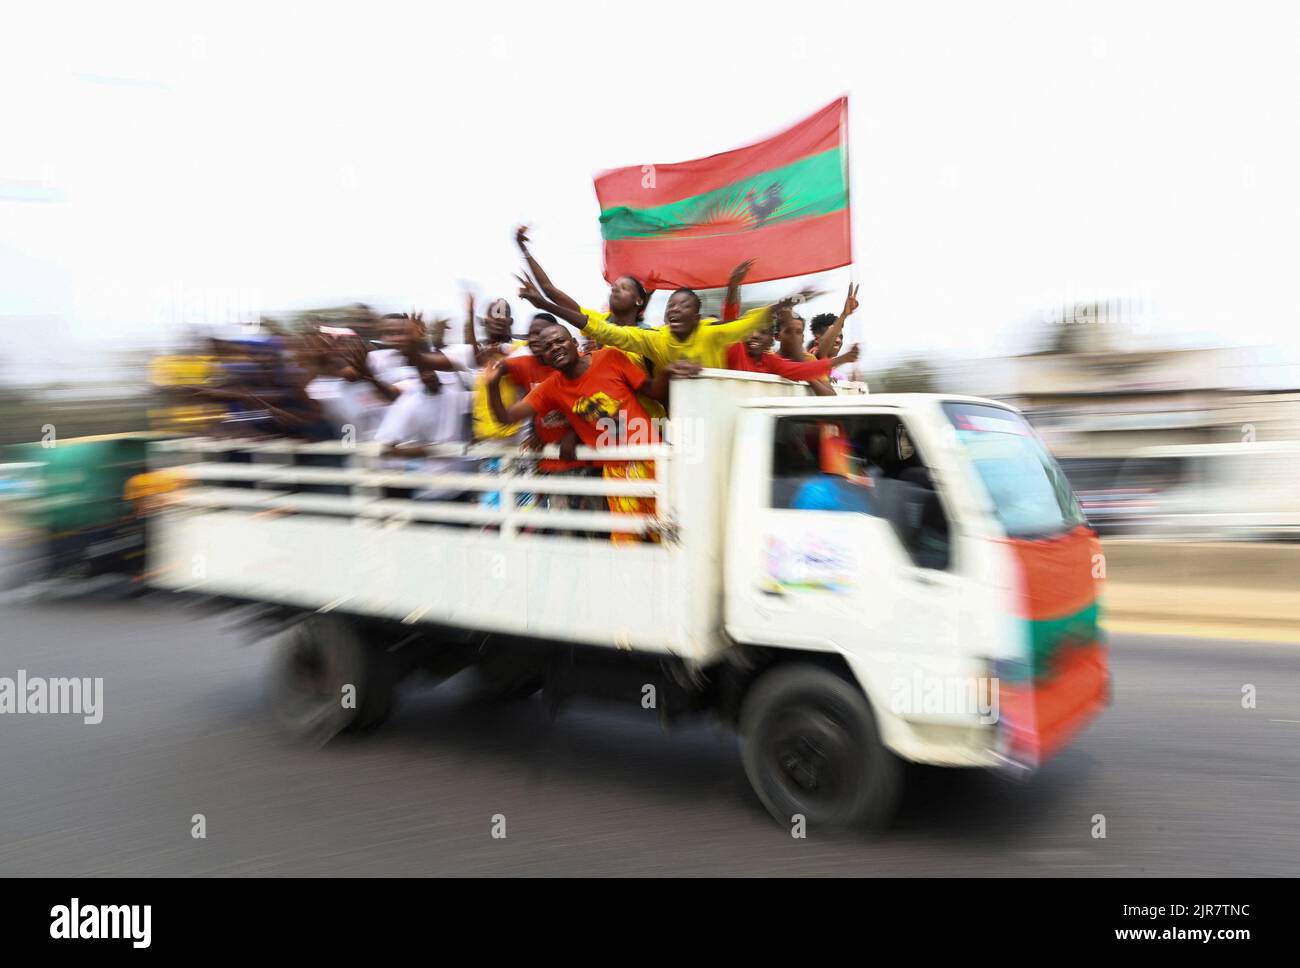 Supporters of Angola's main opposition party UNITA, ride at the back of a truck to attend the party's final rally at Cazenga, outside the capital Luanda in Angola, August 22, 2022.REUTERS/Siphiwe Sibeko Stock Photo